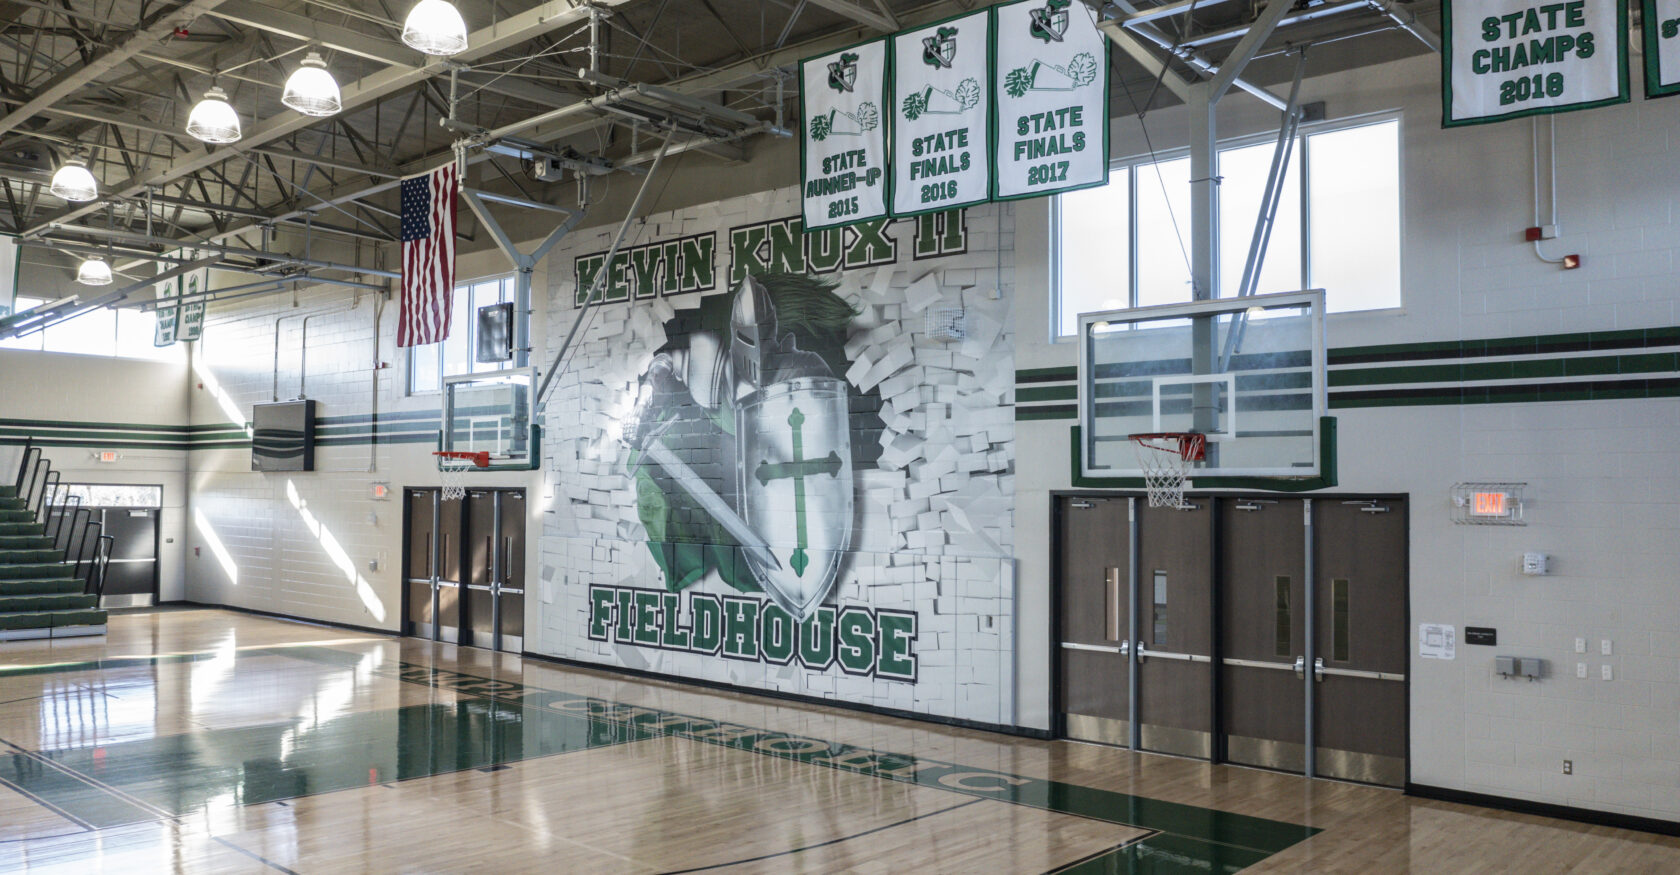 Interior detail shot of mural in the Tampa Catholic basketball court